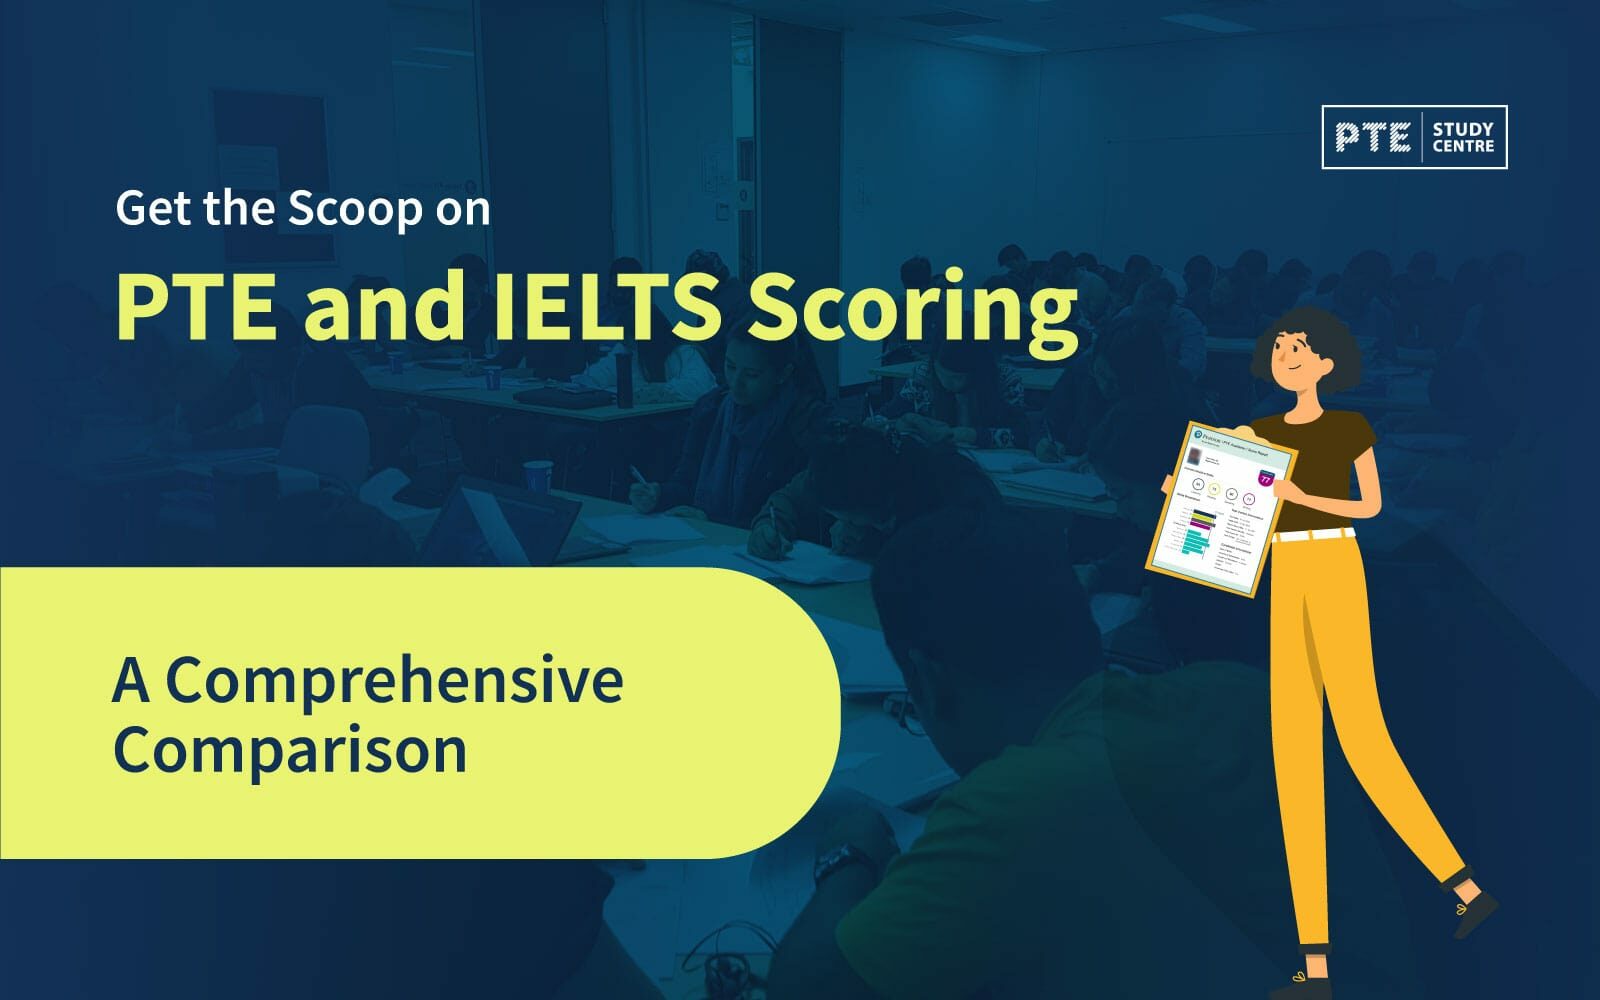 Get the Scoop on PTE and IELTS Scoring: A Comprehensive Comparison